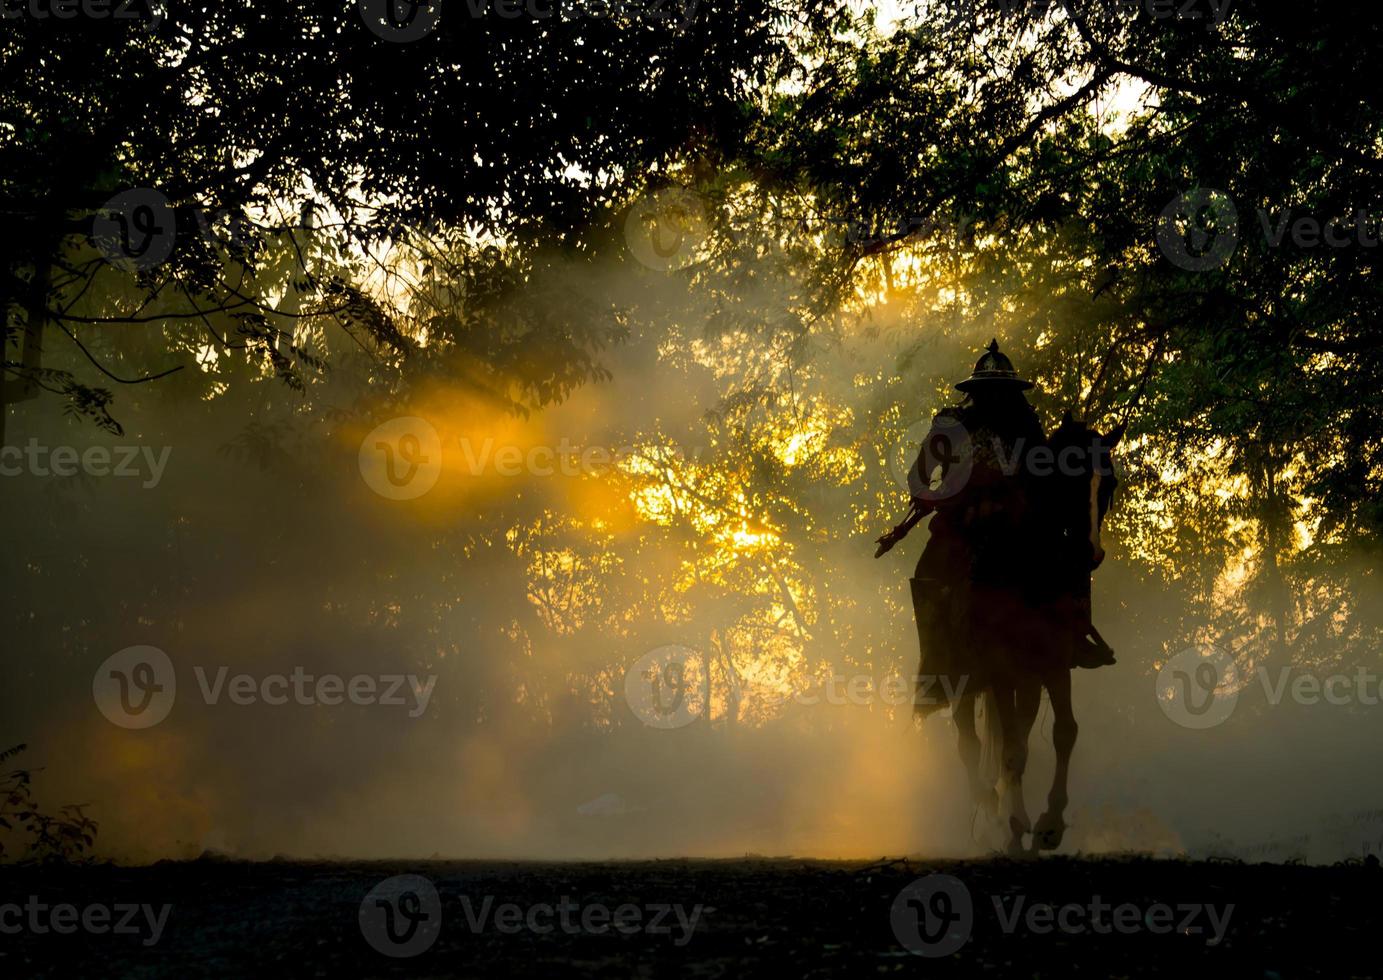 Cowboy on horseback against a beautiful sunset, cowboy and horse at first light, mountain, river and lifestyle with natural light background photo